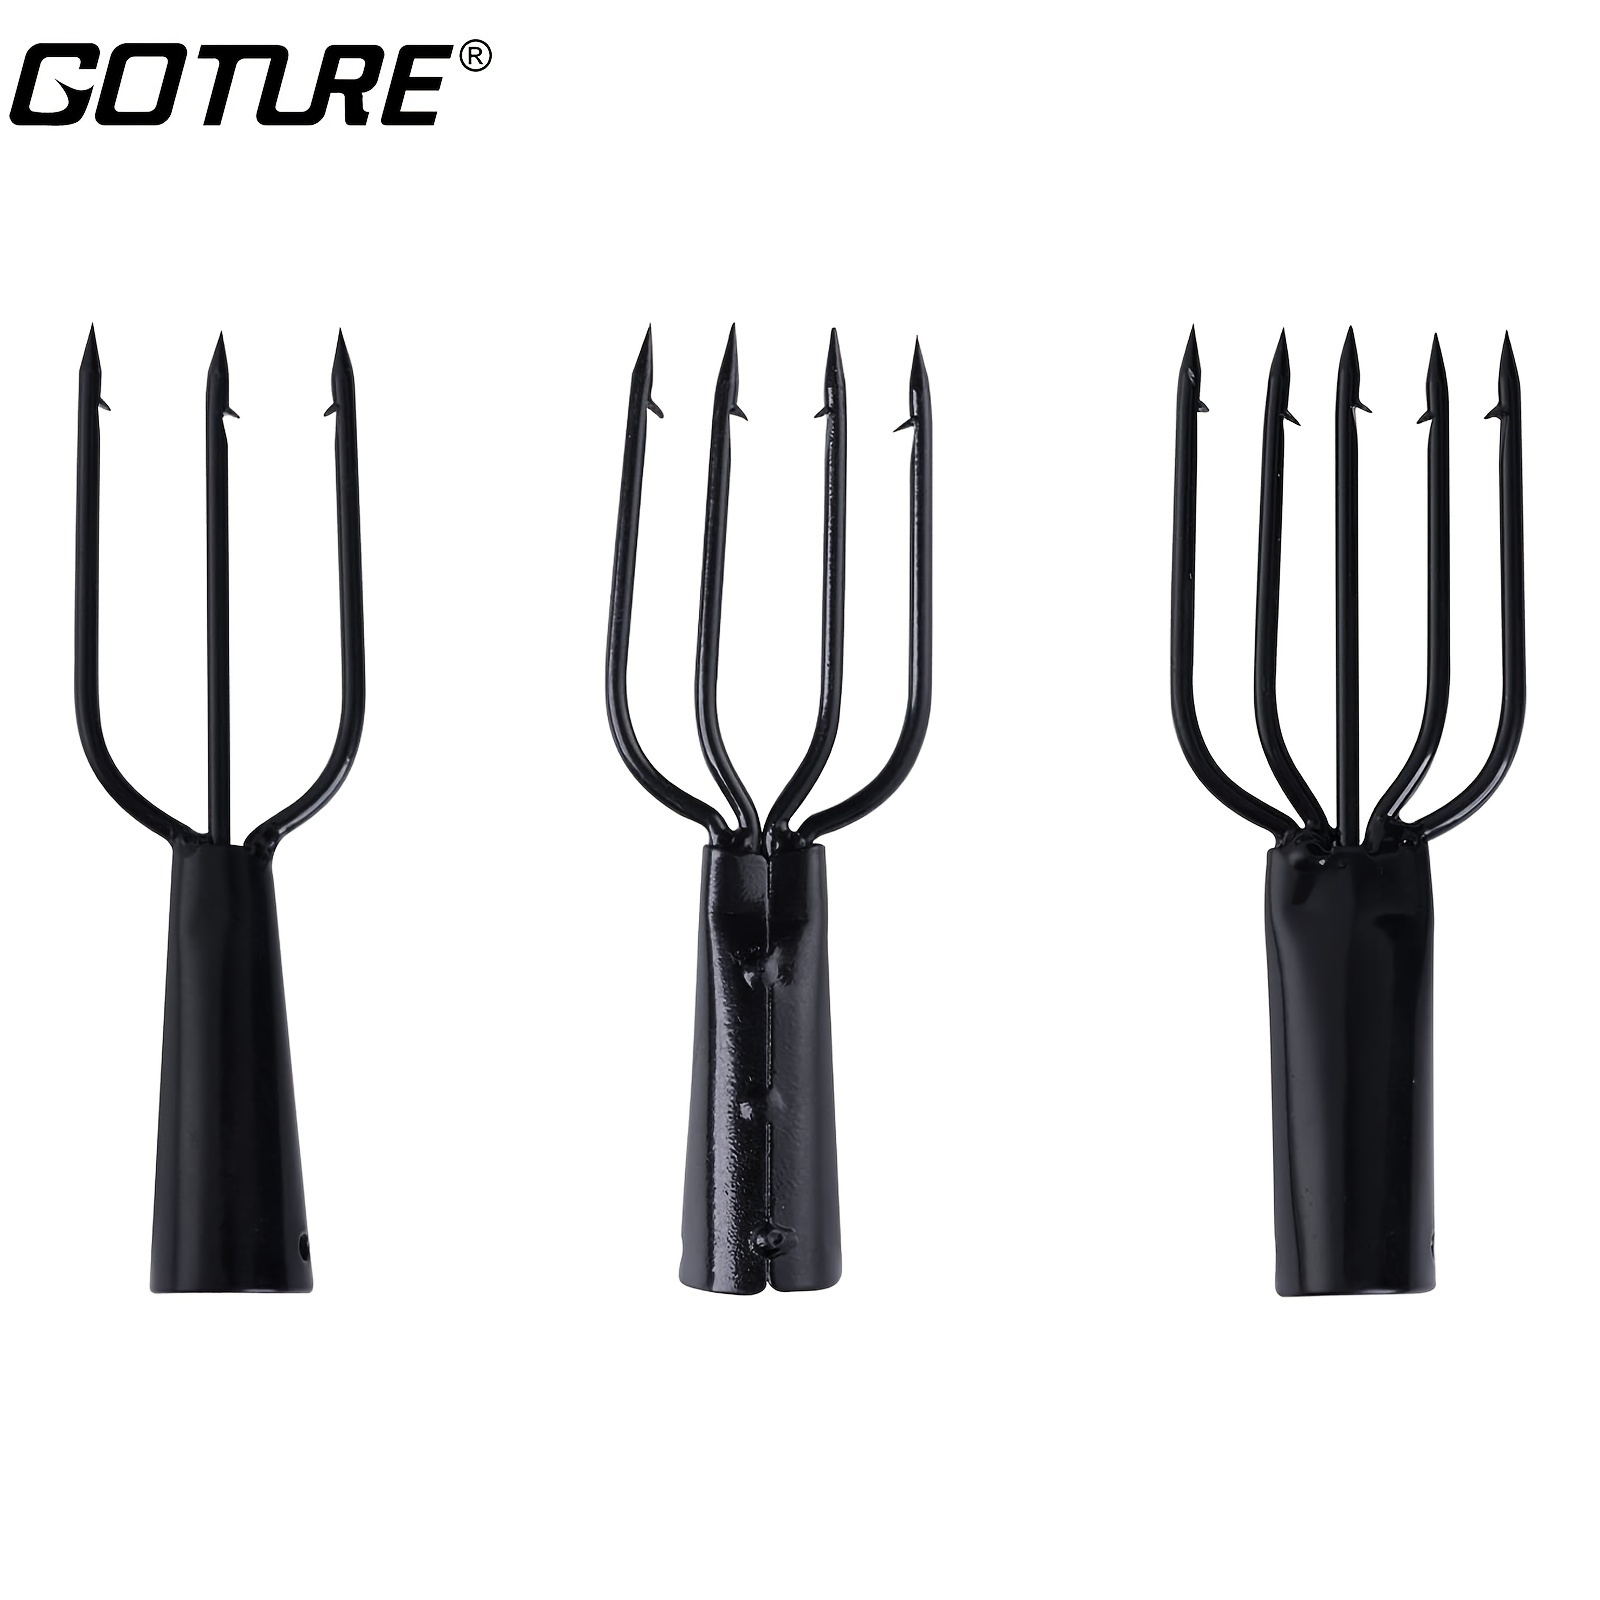  Goture Fish Spear Frog Spear Barbed Stainless Steel Tine Fishing  Harpoon Fishing Spear Gig Gaff Fork Hook Screw for Frog and Fish Spear  Fishing Fork Harpoon Tip with Barbs 